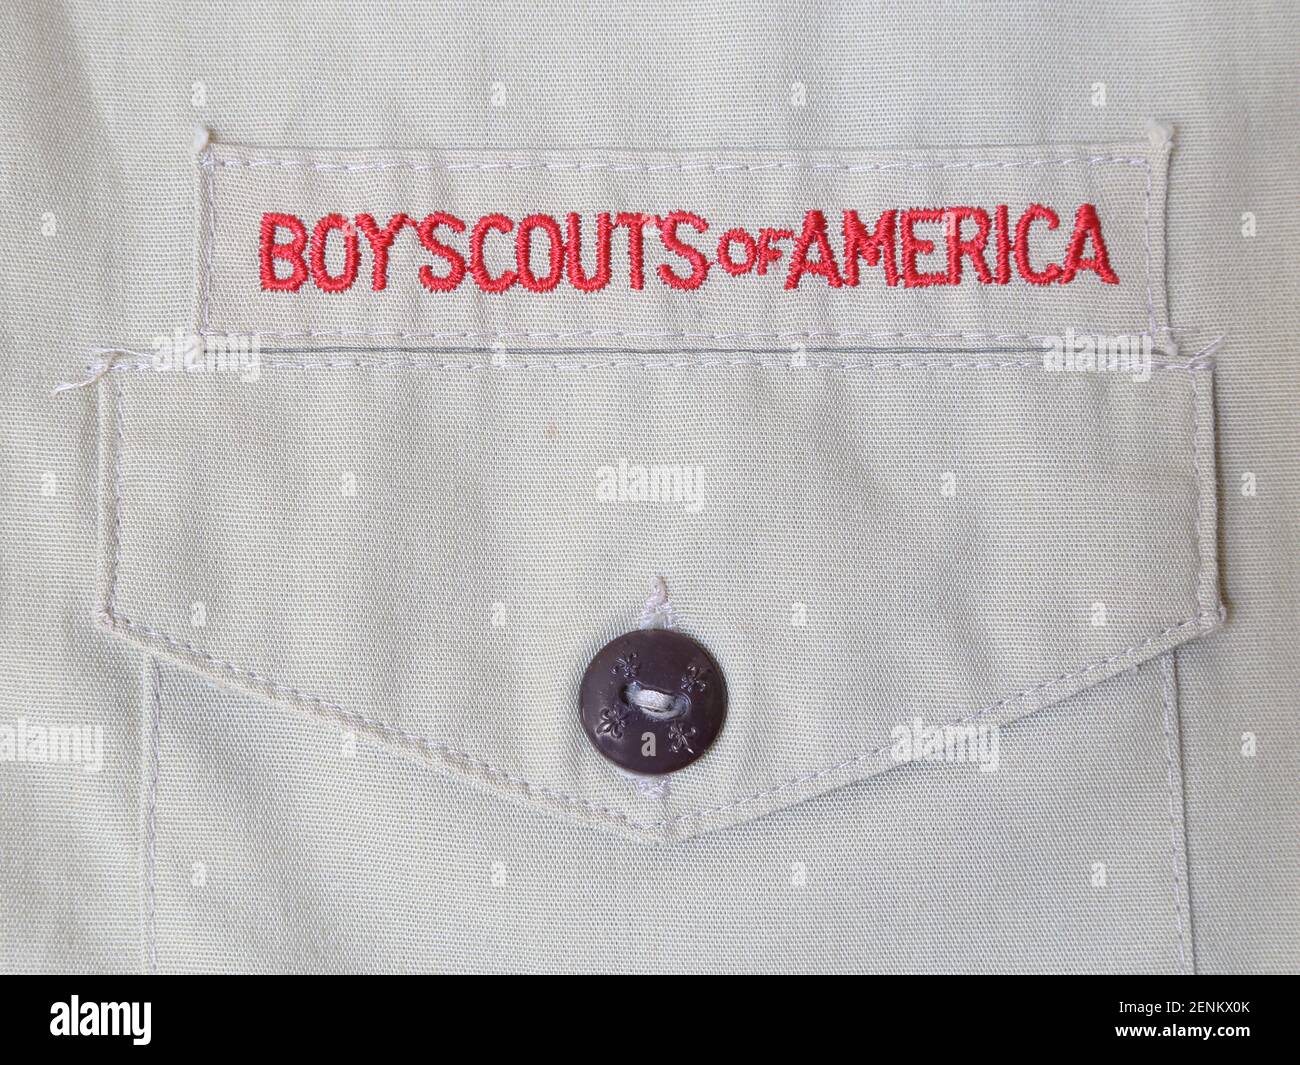 Los Angeles, CA / USA - Feb. 17, 2021: A Boy Scouts of America text patch is shown on a uniform shirt up close. For editorial uses only. Stock Photo